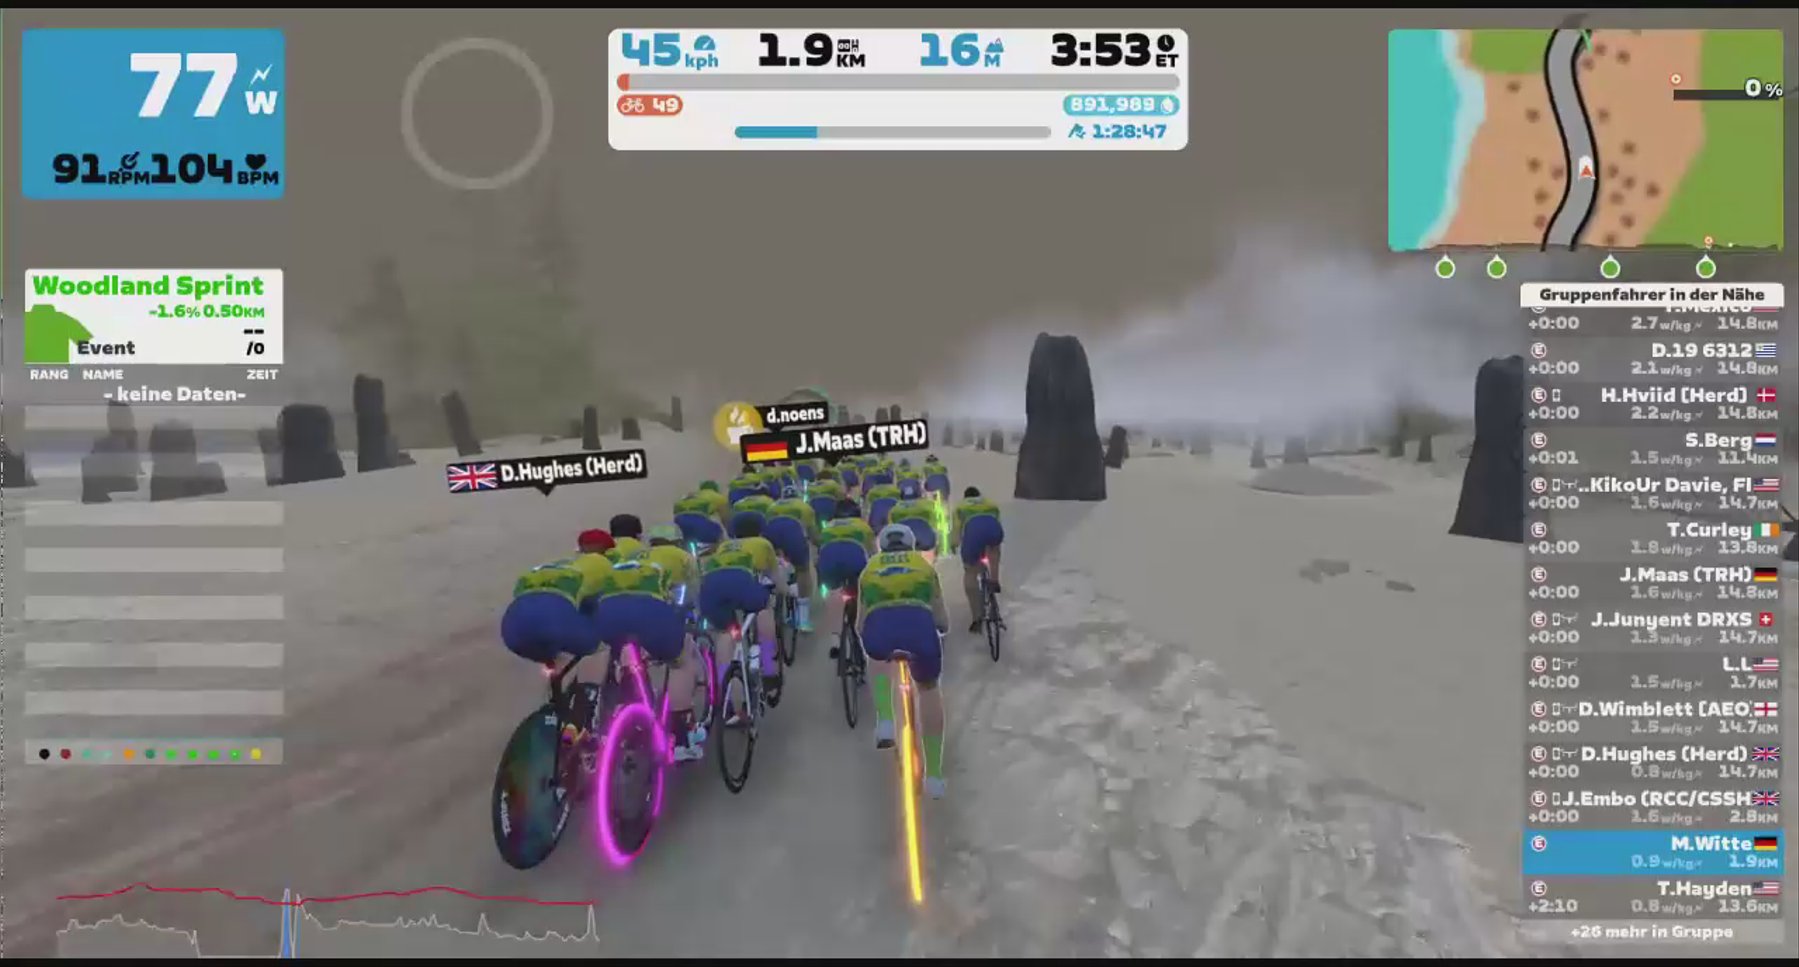 Zwift - Group Ride: Endurance Group ride hosted by ZTBR- Zwift Team Brazil (E) on Canopies and Coastlines in Watopia